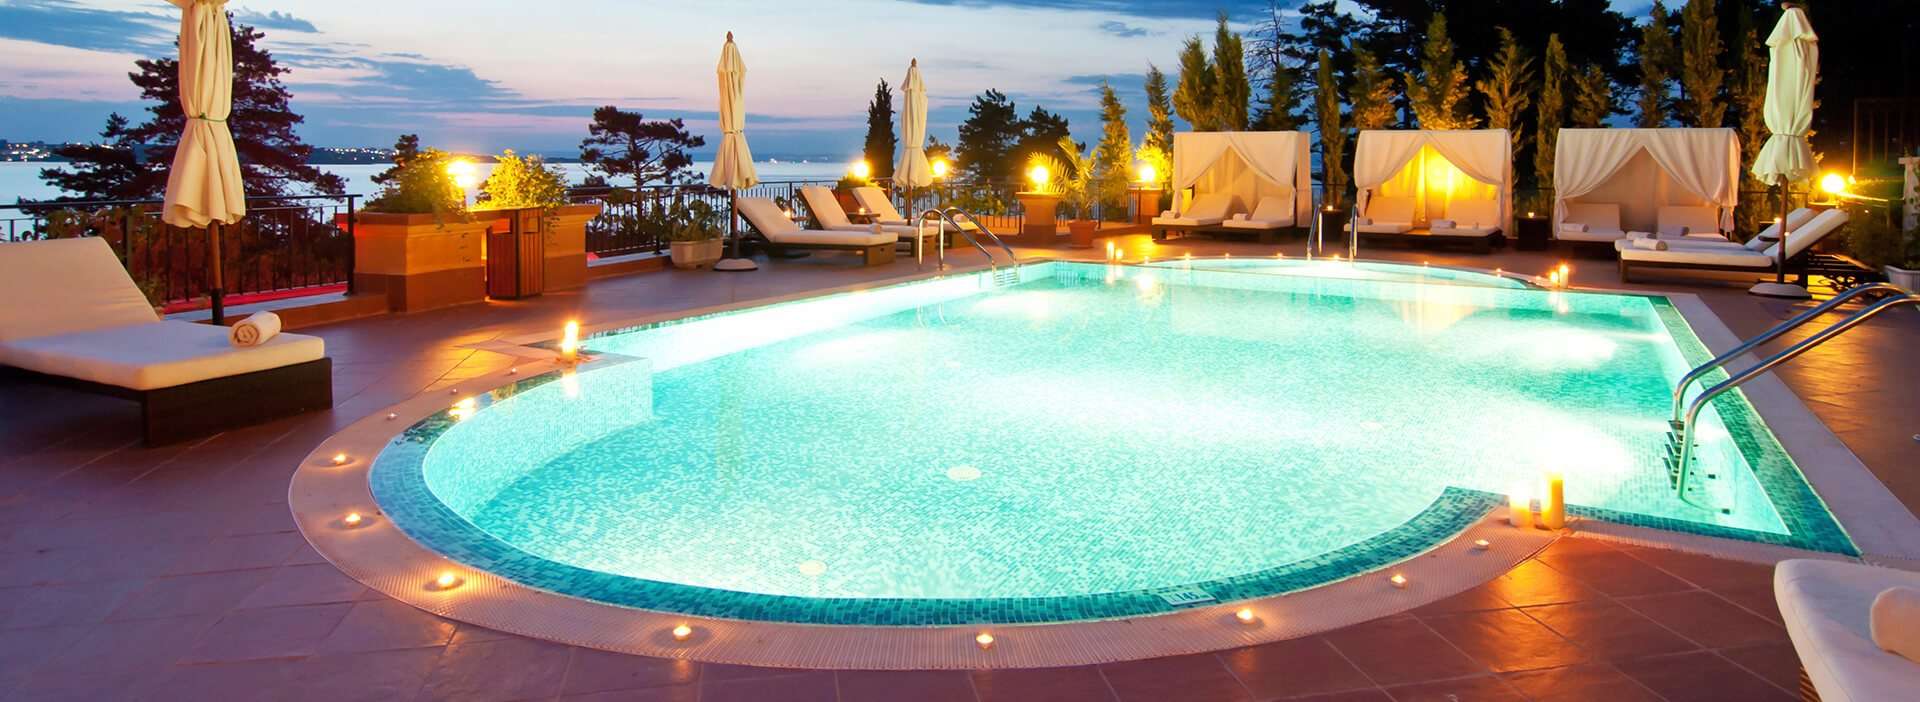 Pool and Patio at Night